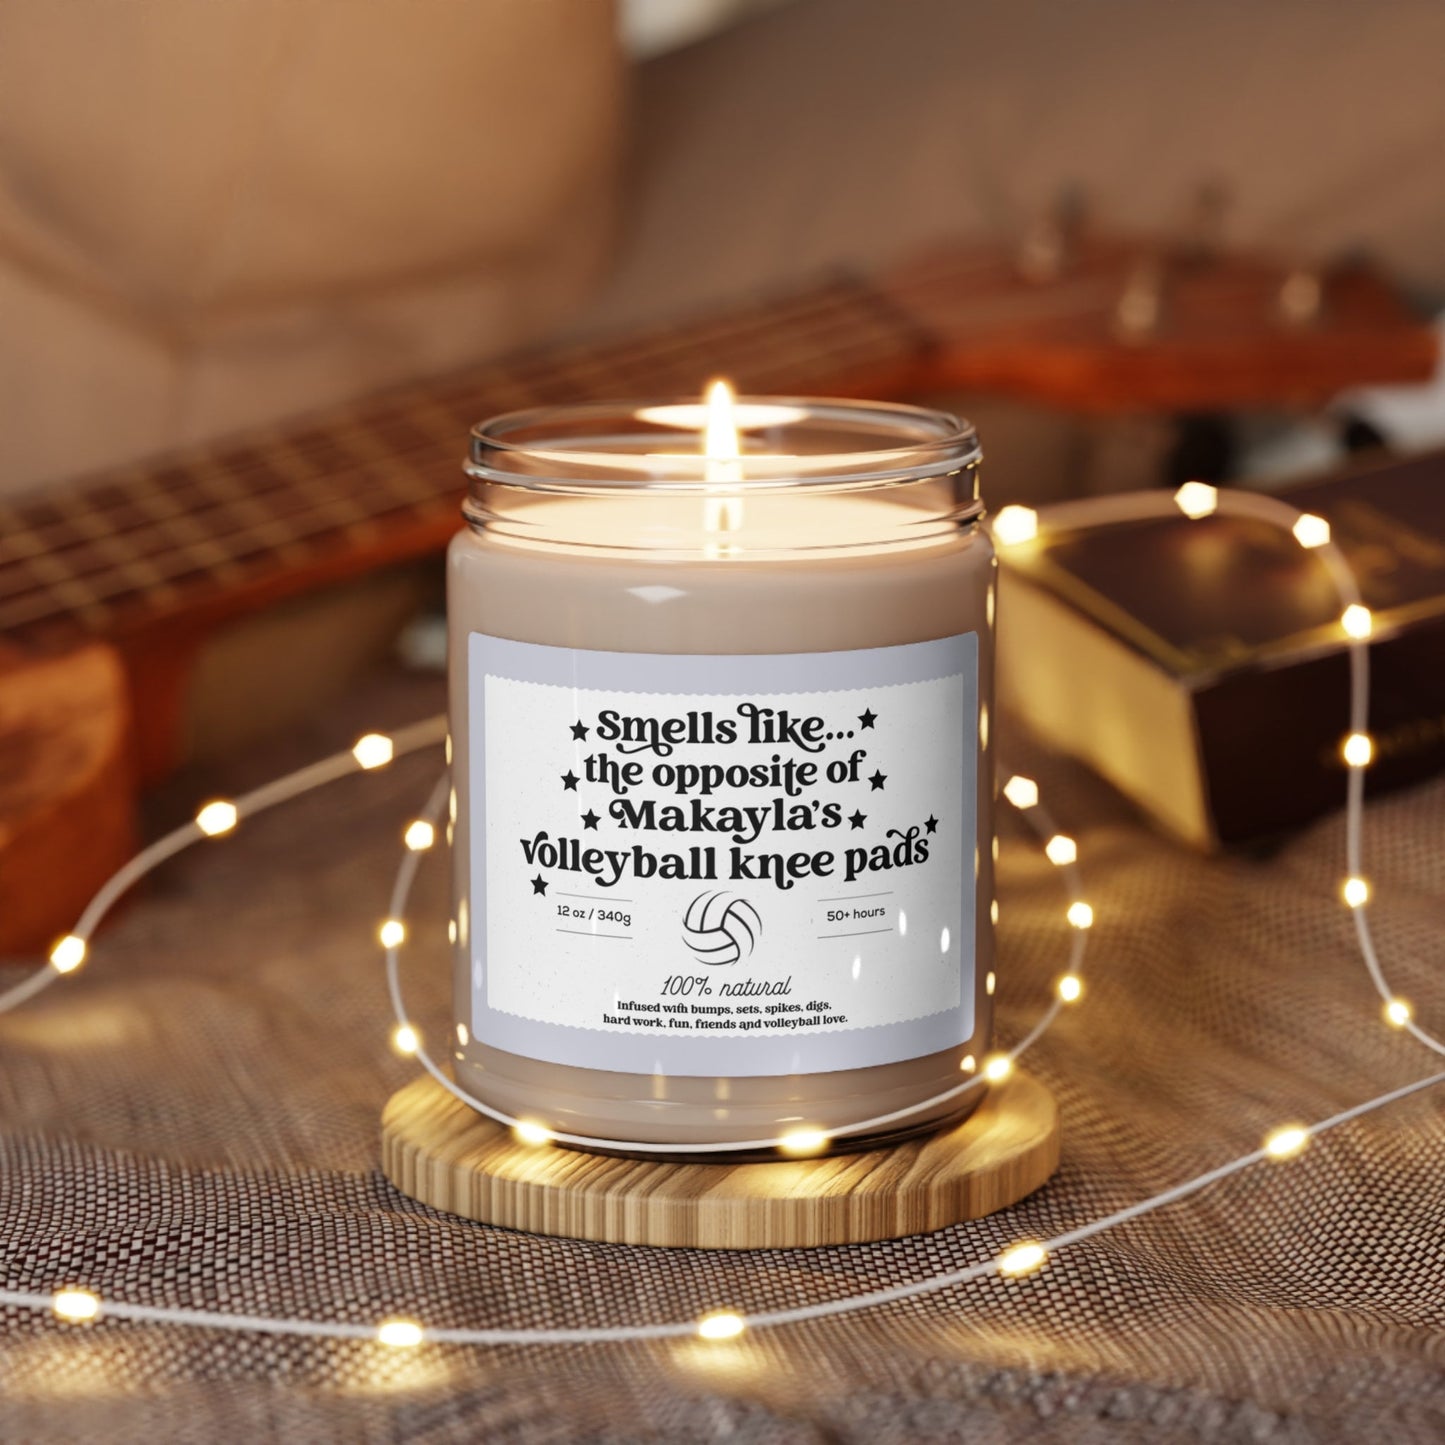 Personalized Smells Like the Opposite of Knee Pads Volleyball Candle